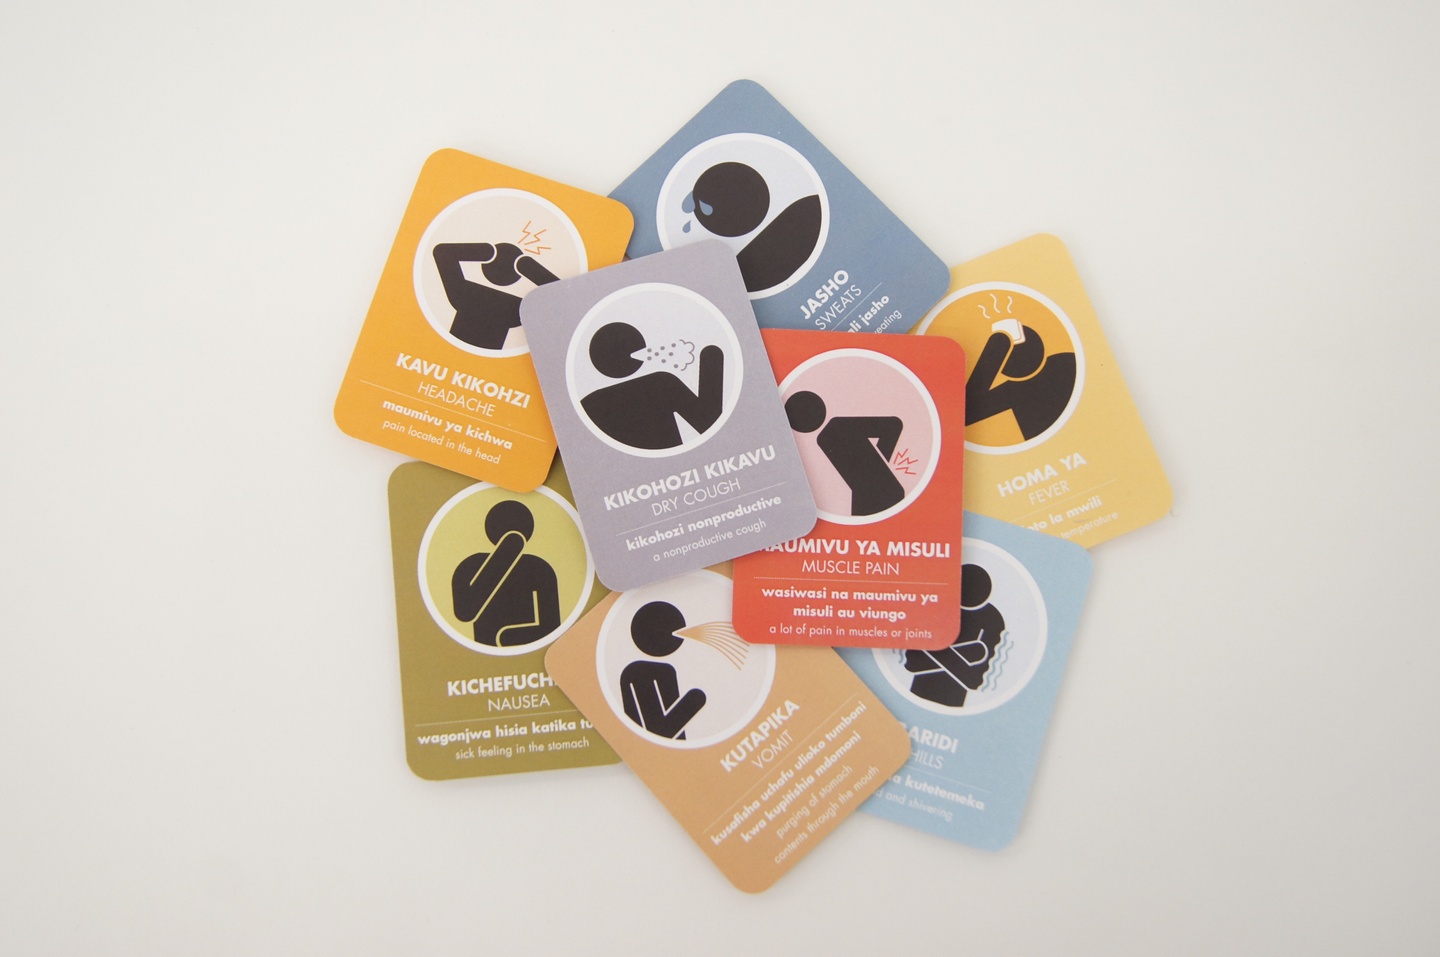 Set of eight cards with different-colored backgrounds, each featuring a simple illustration and text about different malaria symptoms.